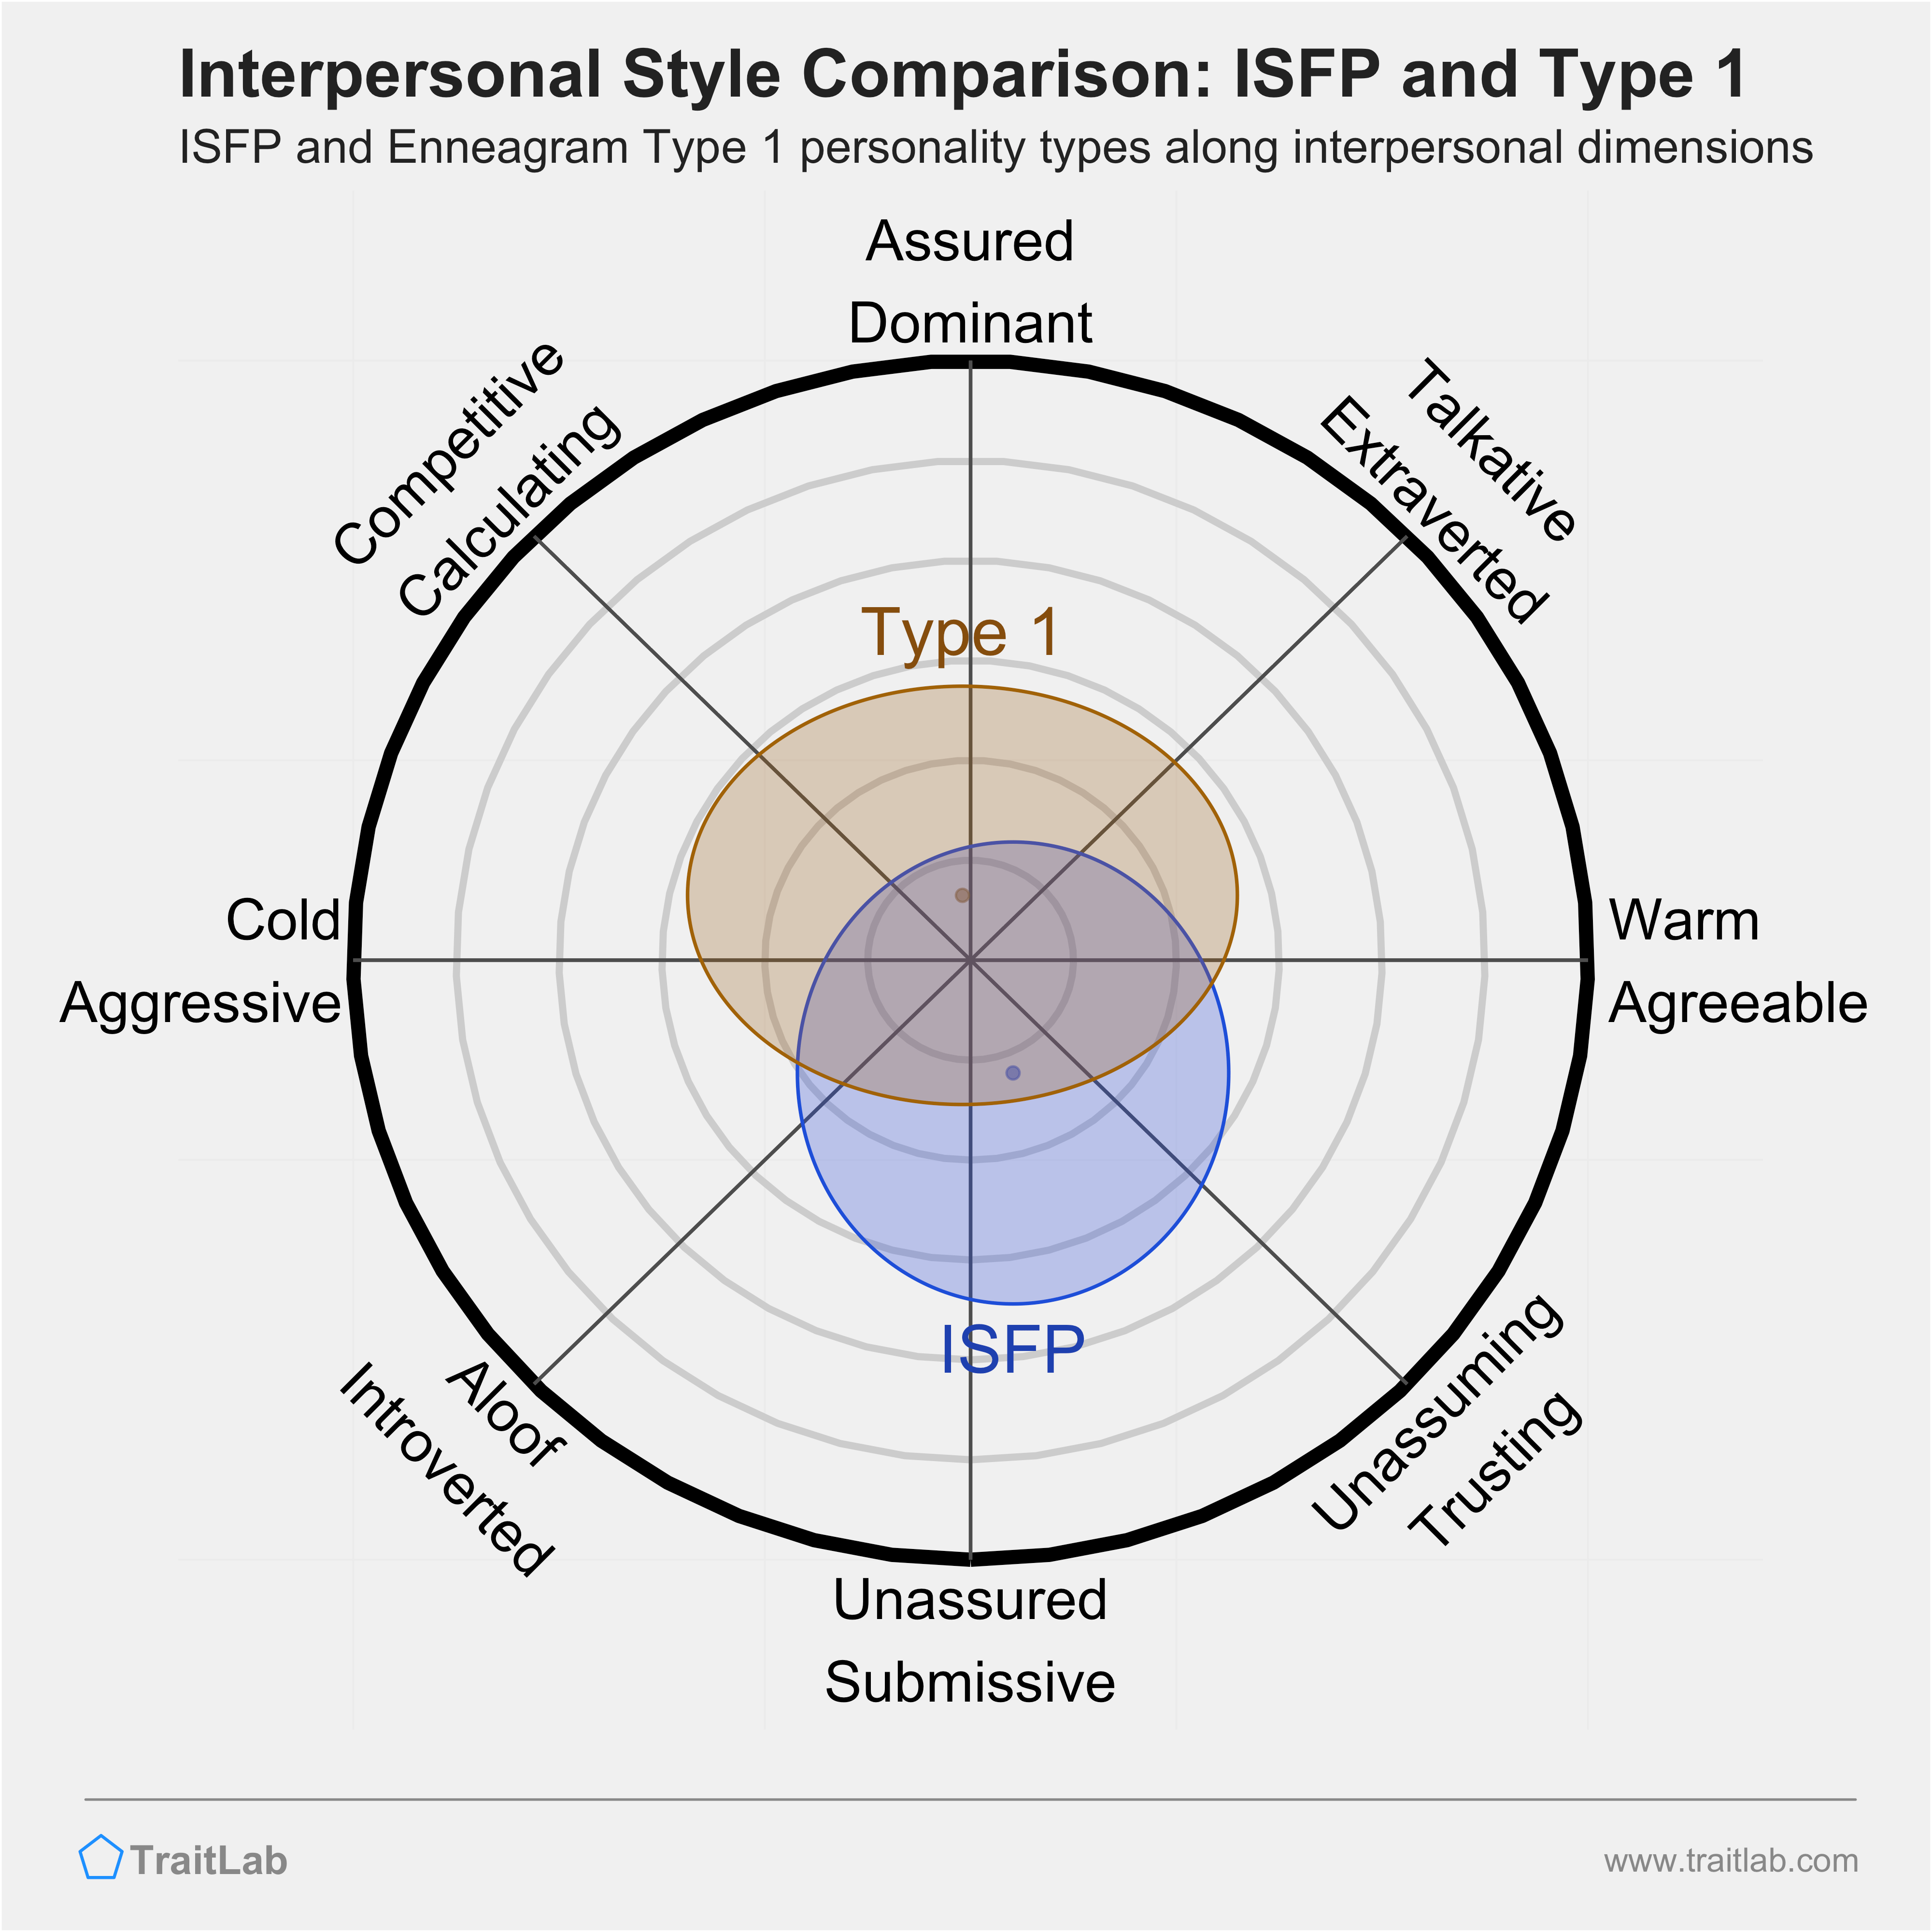 Enneagram ISFP and Type 1 comparison across interpersonal dimensions